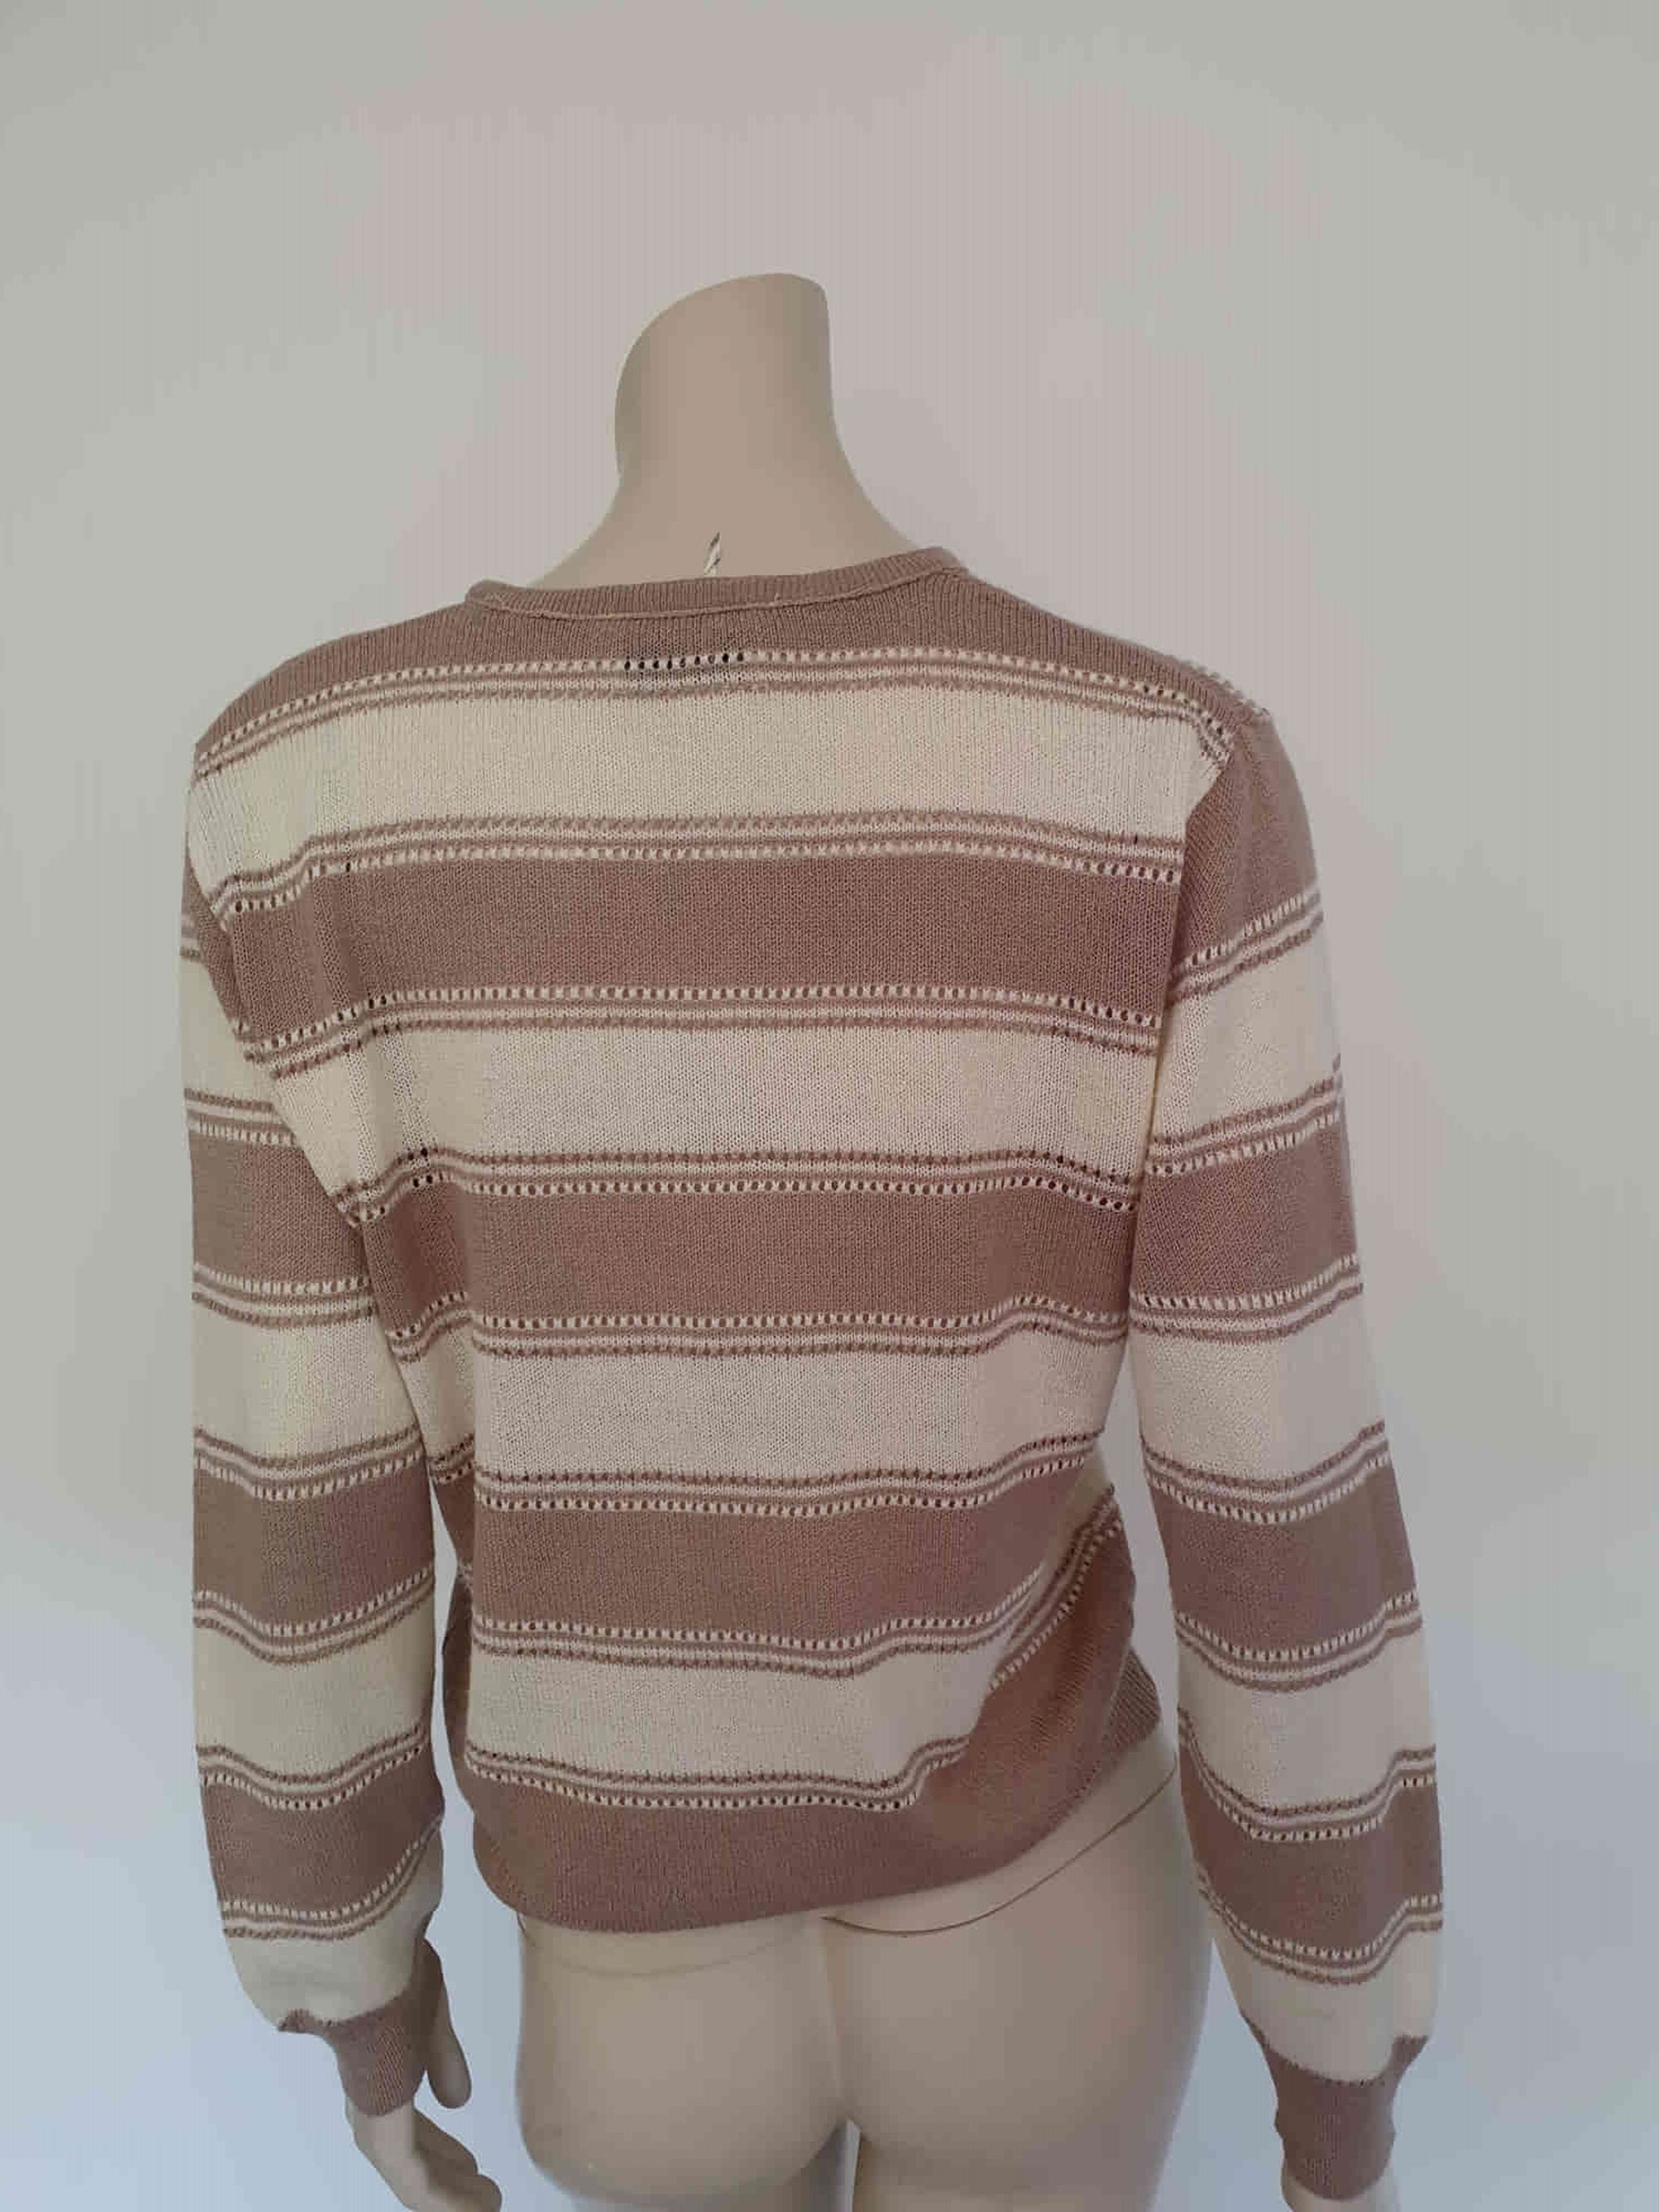 1980s vintage beige and cream striped jumper pullover by aywon medium